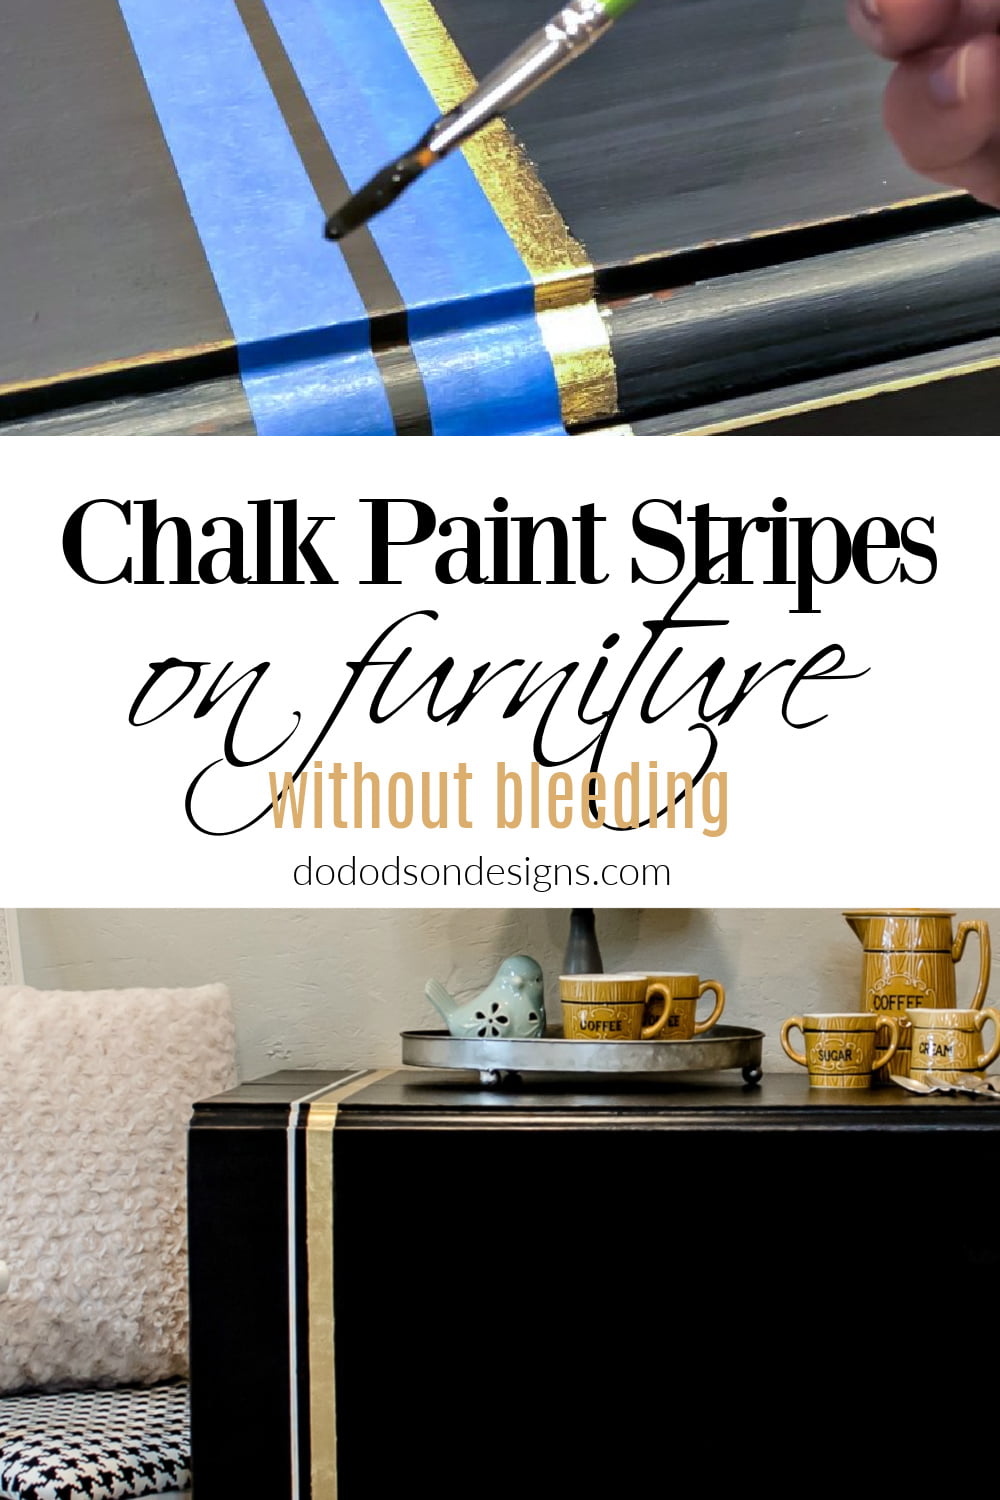 How To Easily Chalk Paint Stripes Without Bleeding